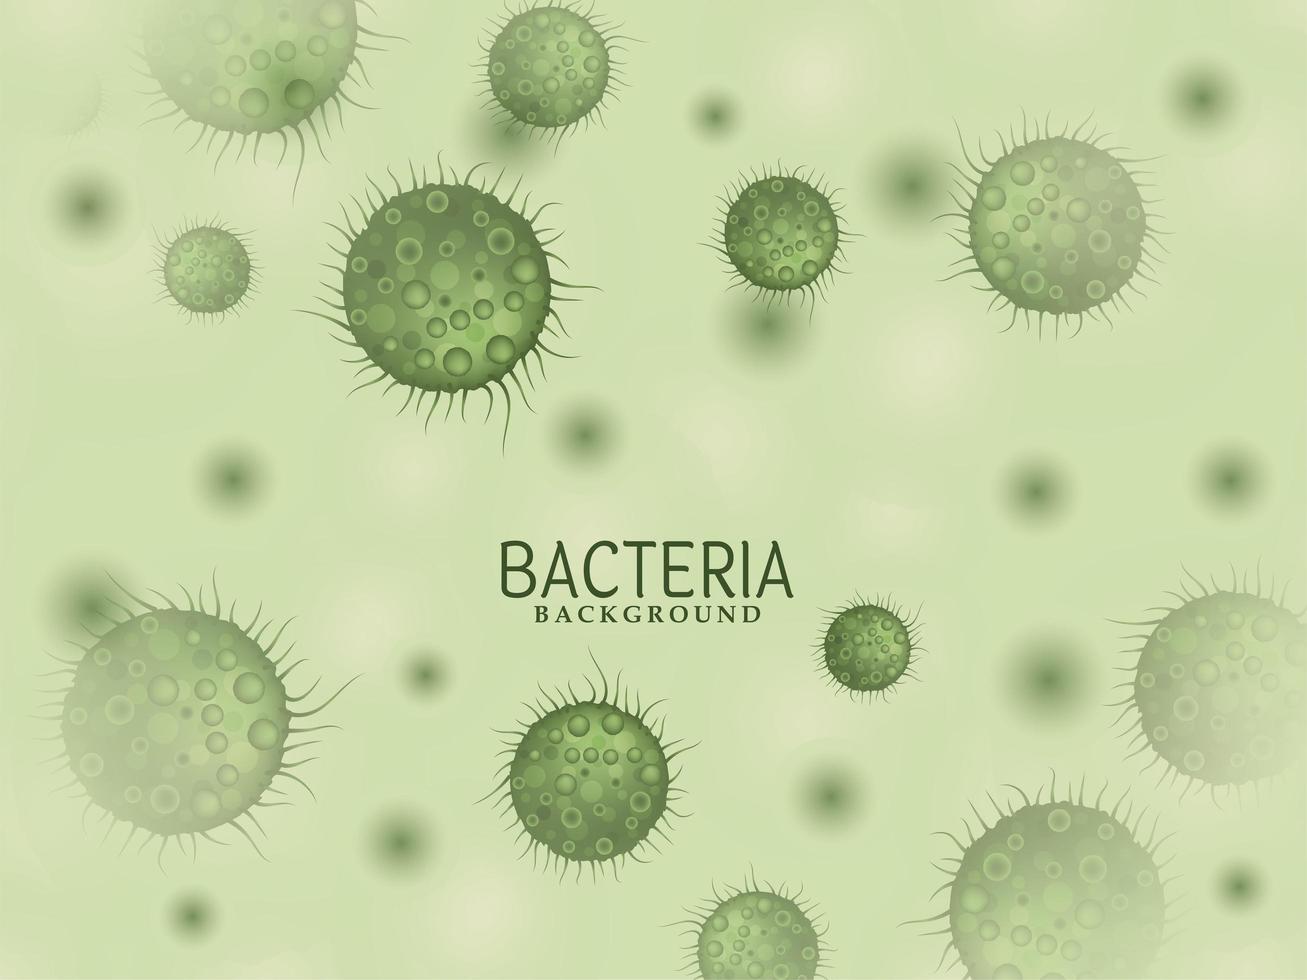 Modern bacteria germs in green background vector